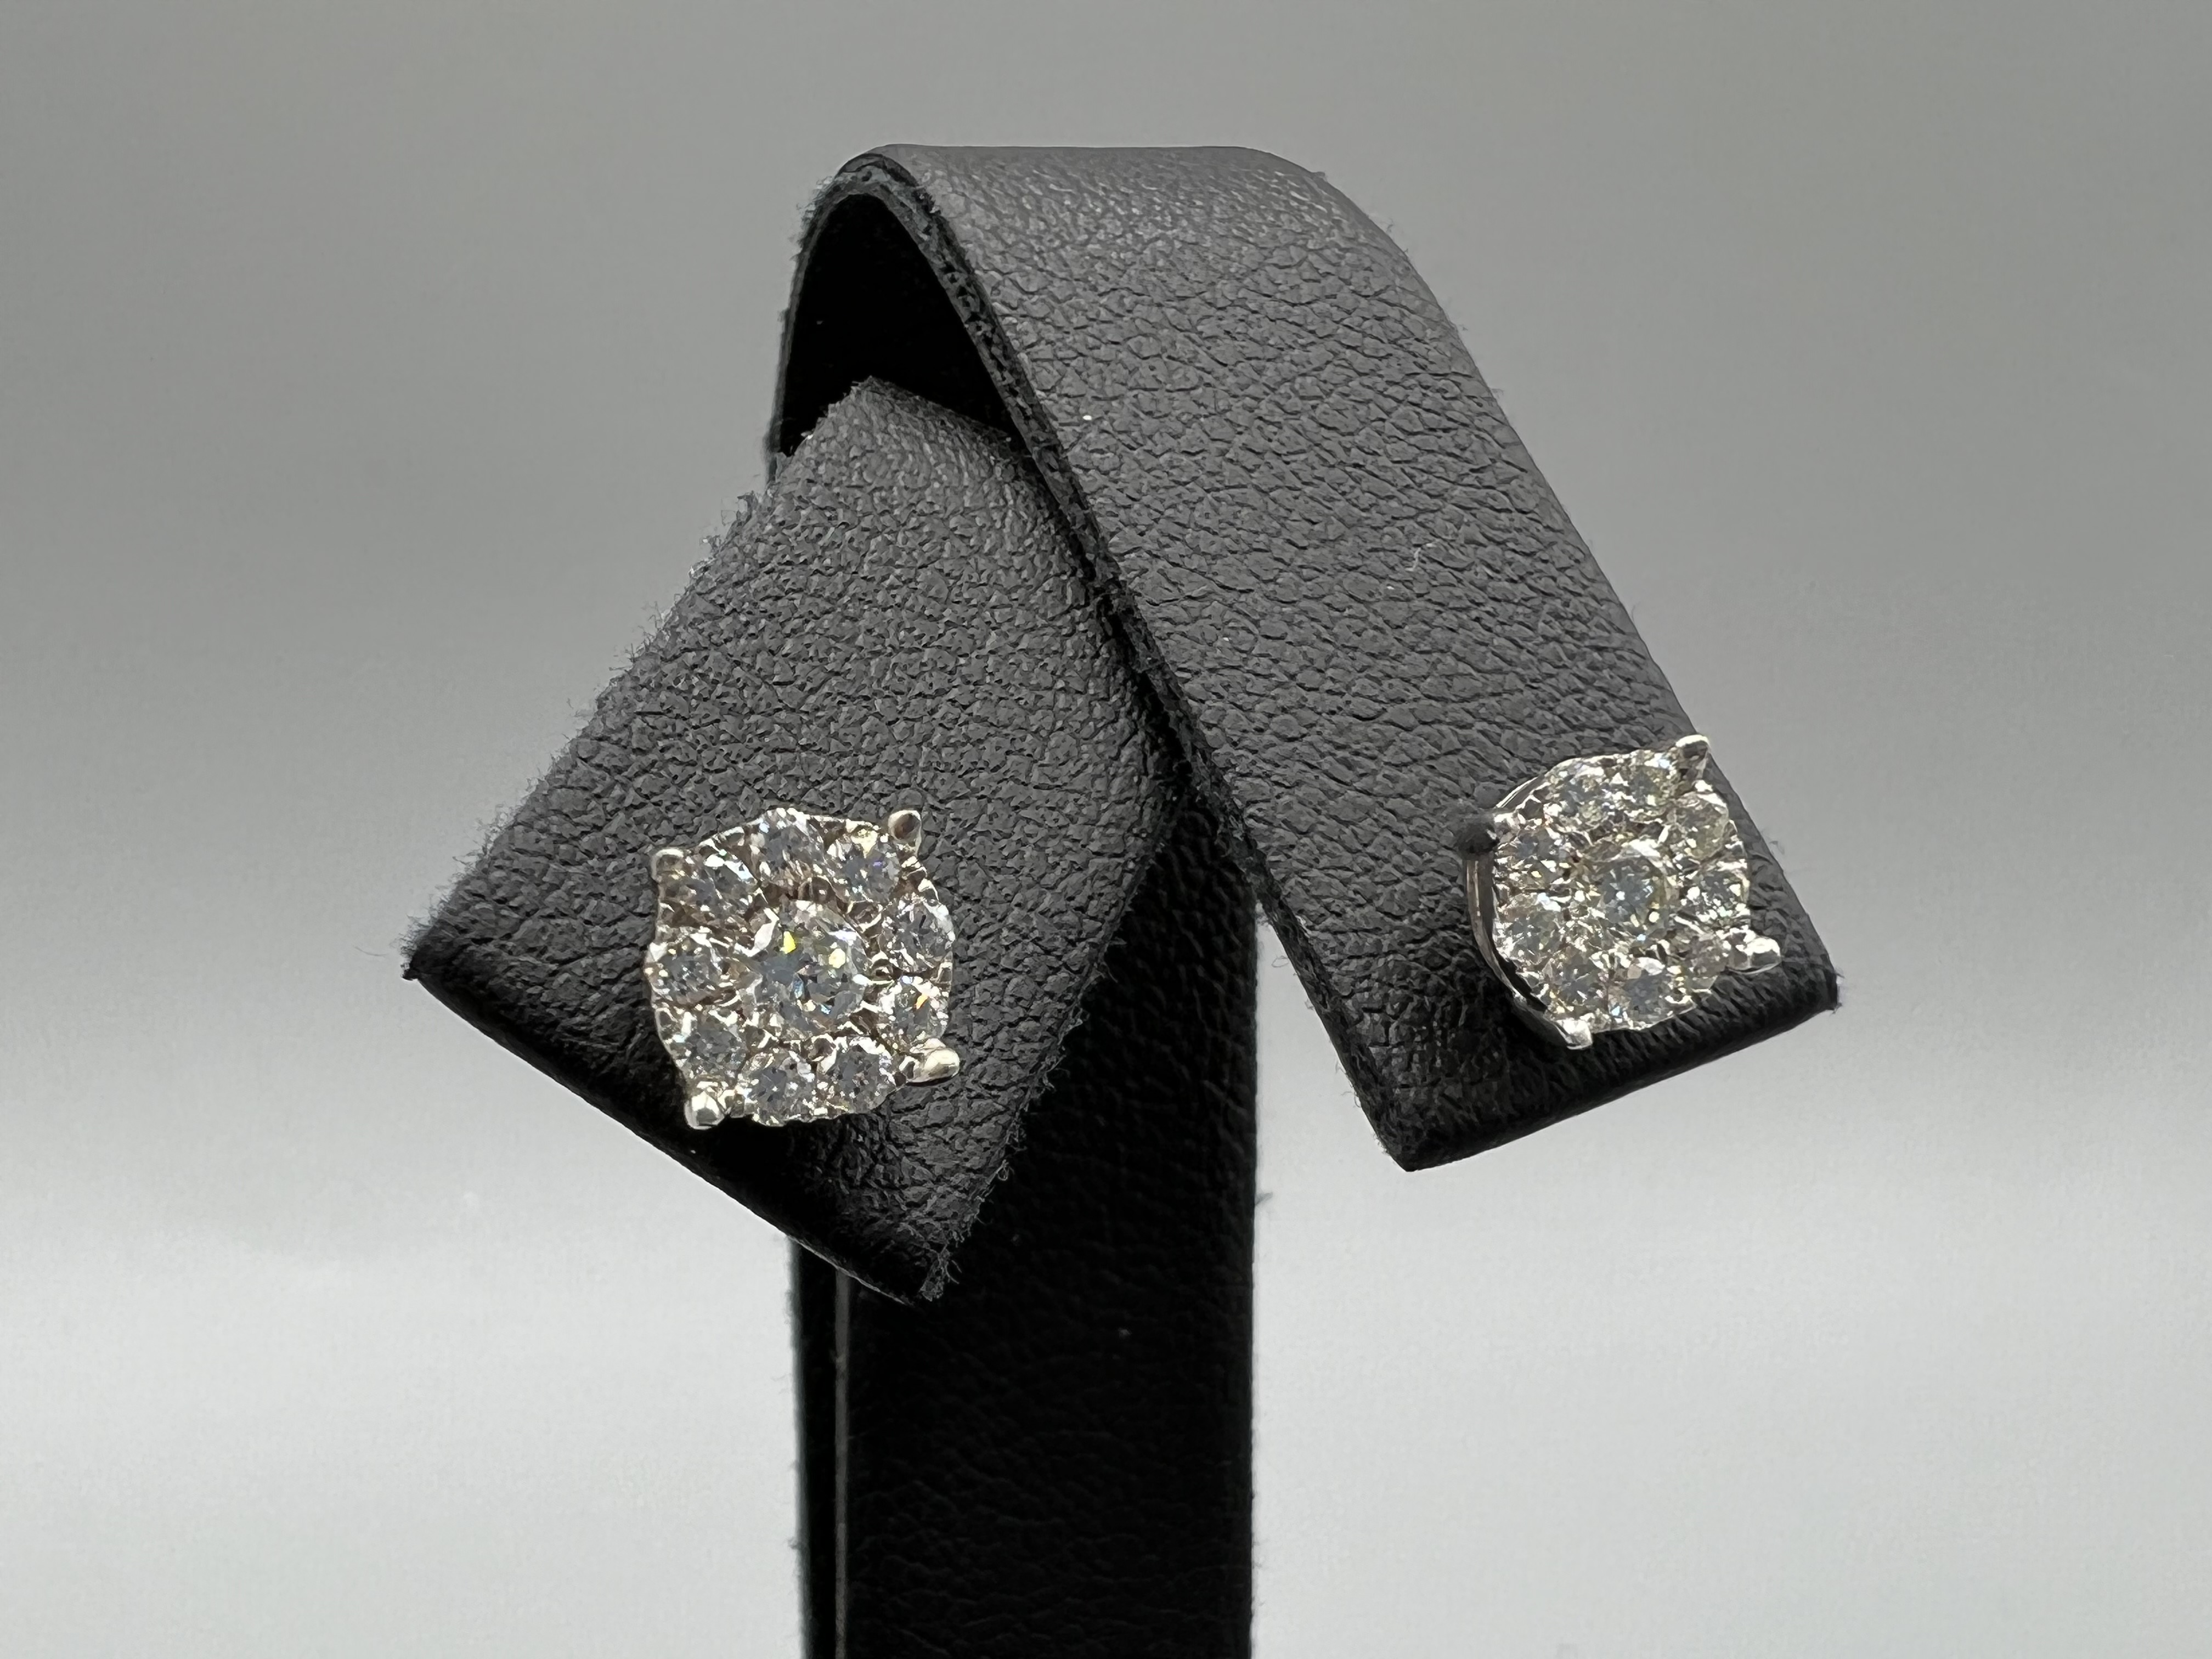 0.80cts Diamond Cluster Stud Earrings in 9ct White Gold 1.3 grams in weight - Image 2 of 2